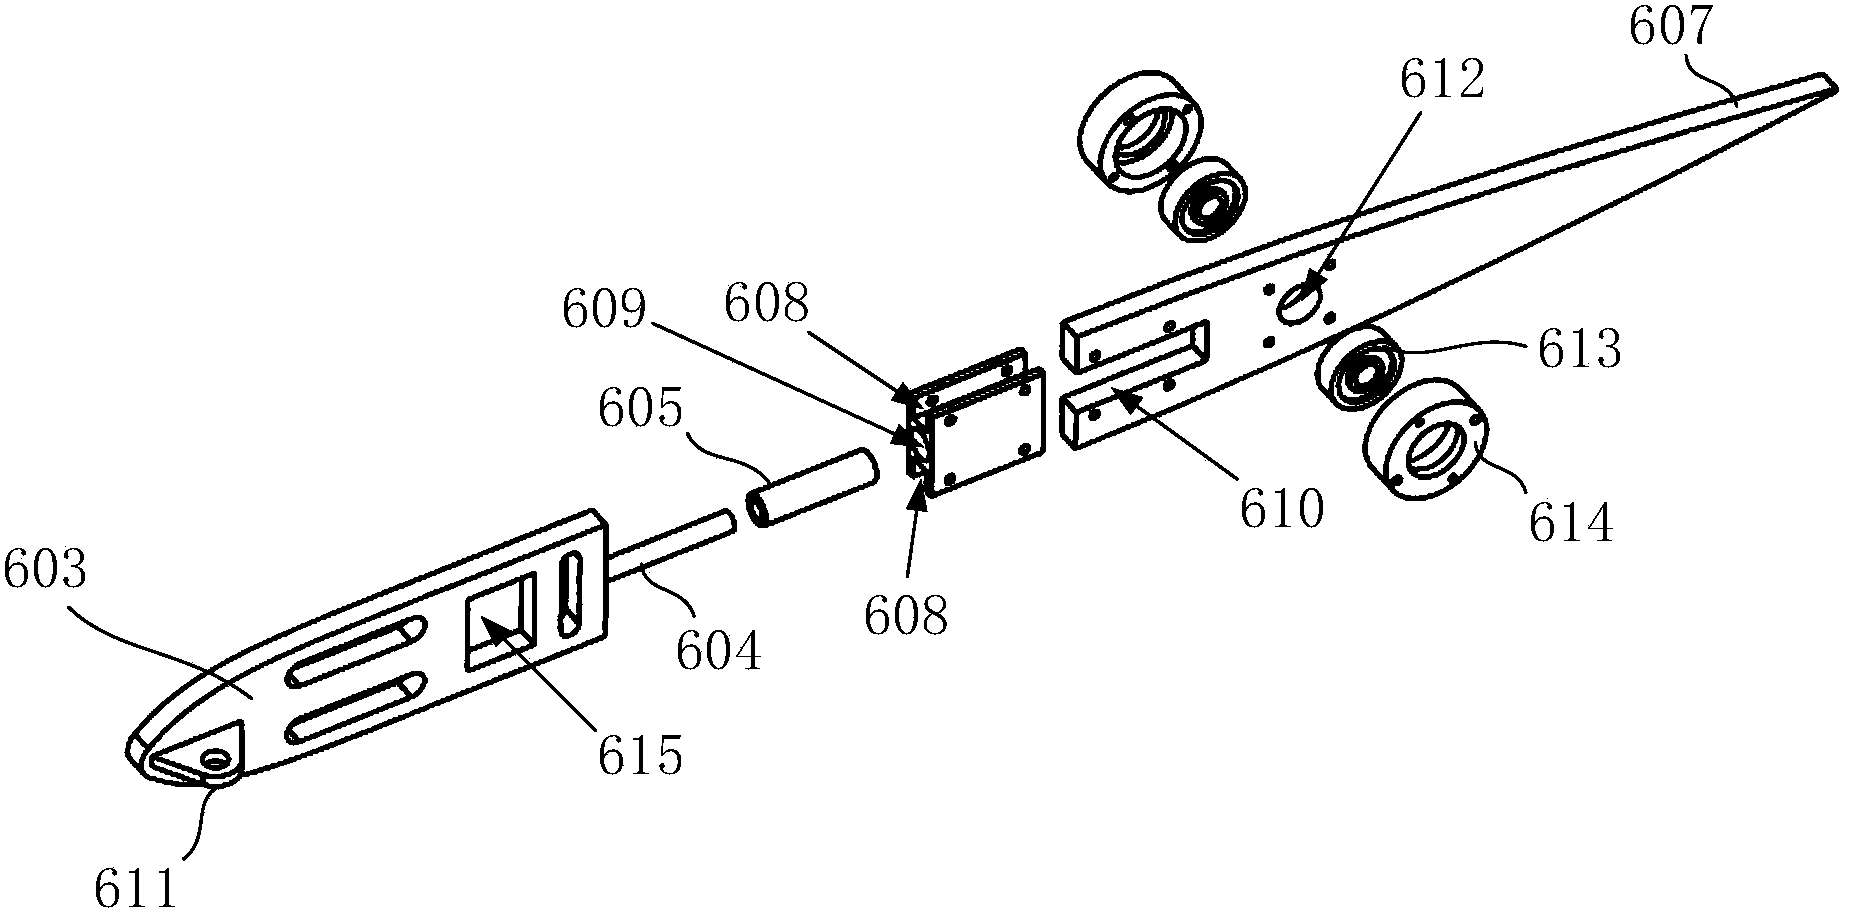 Underwater propulsion device based on two-stage parallel-connection type oscillating bar mechanism drive